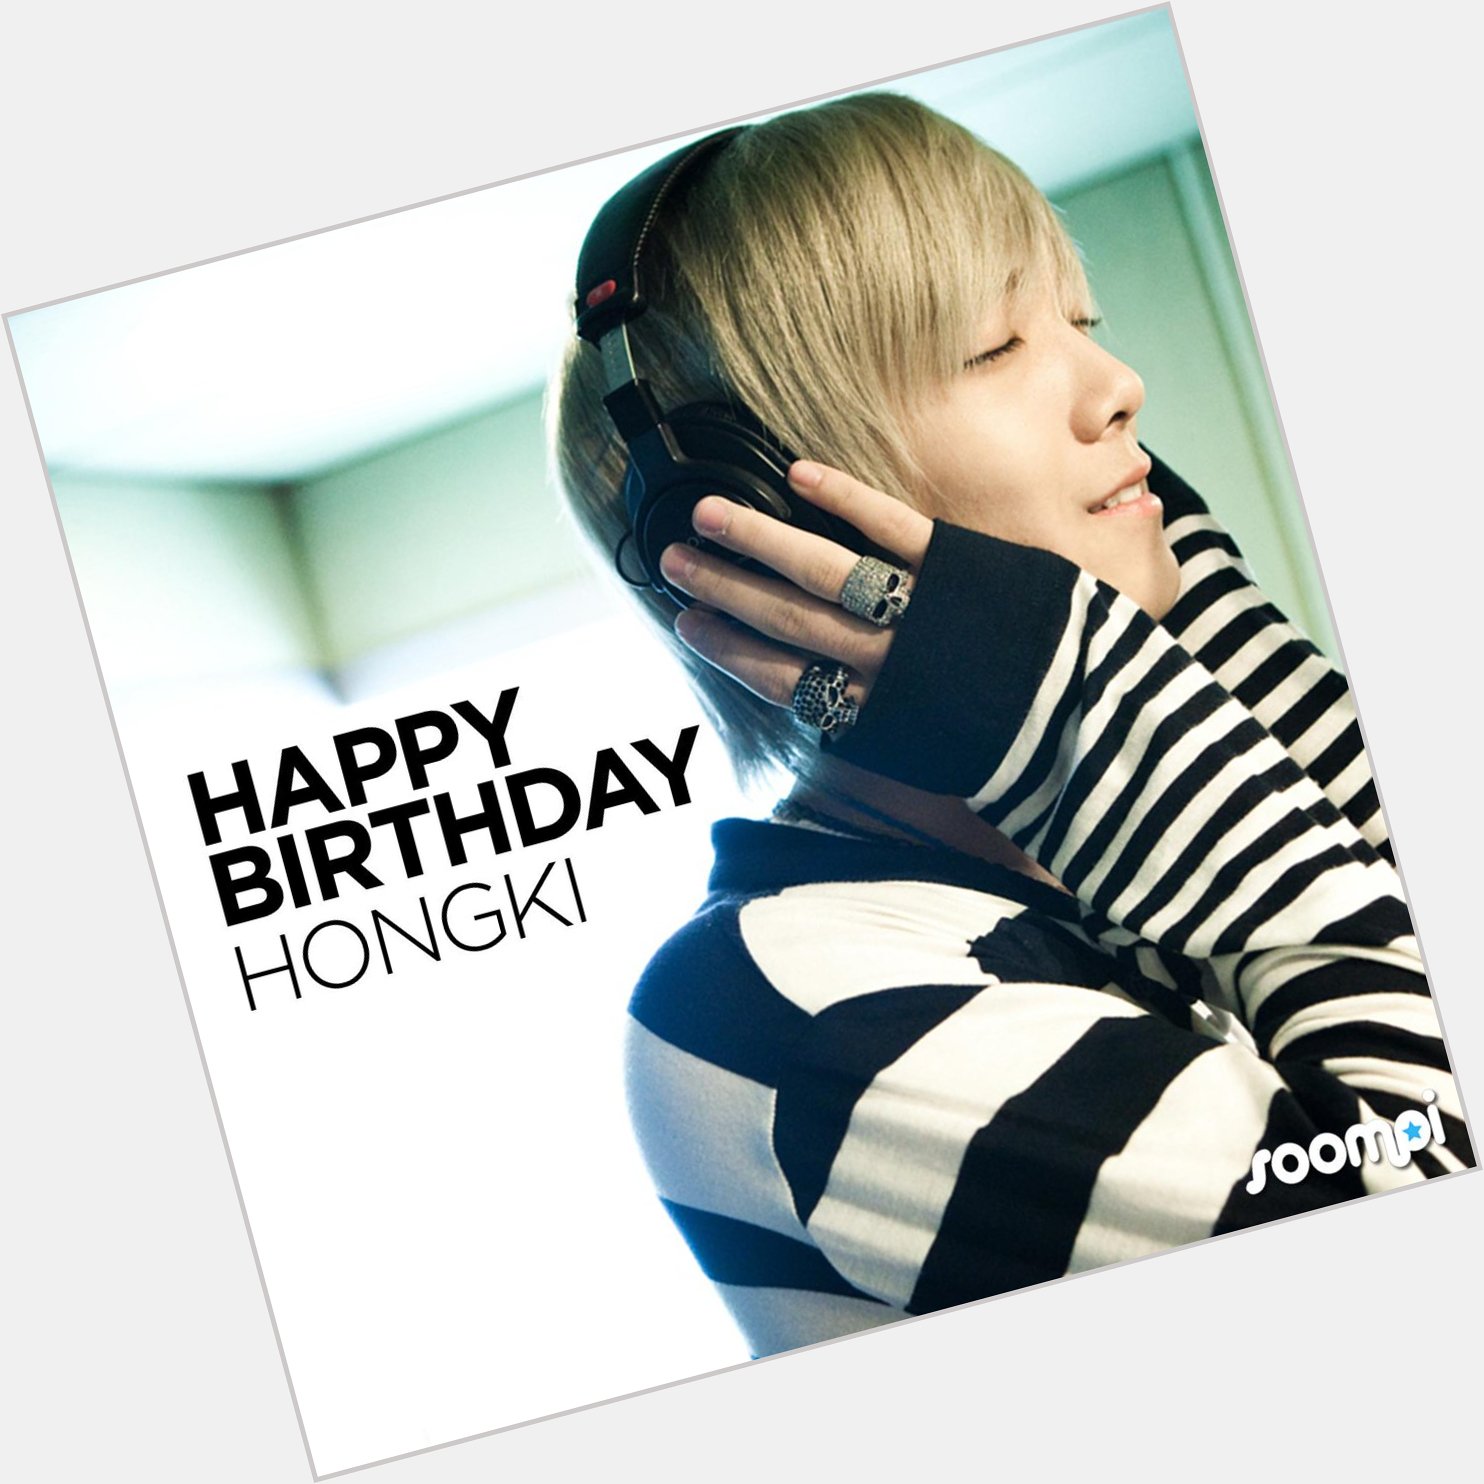    Happy Birthday to Lee Hongki Celebrate by checking out 